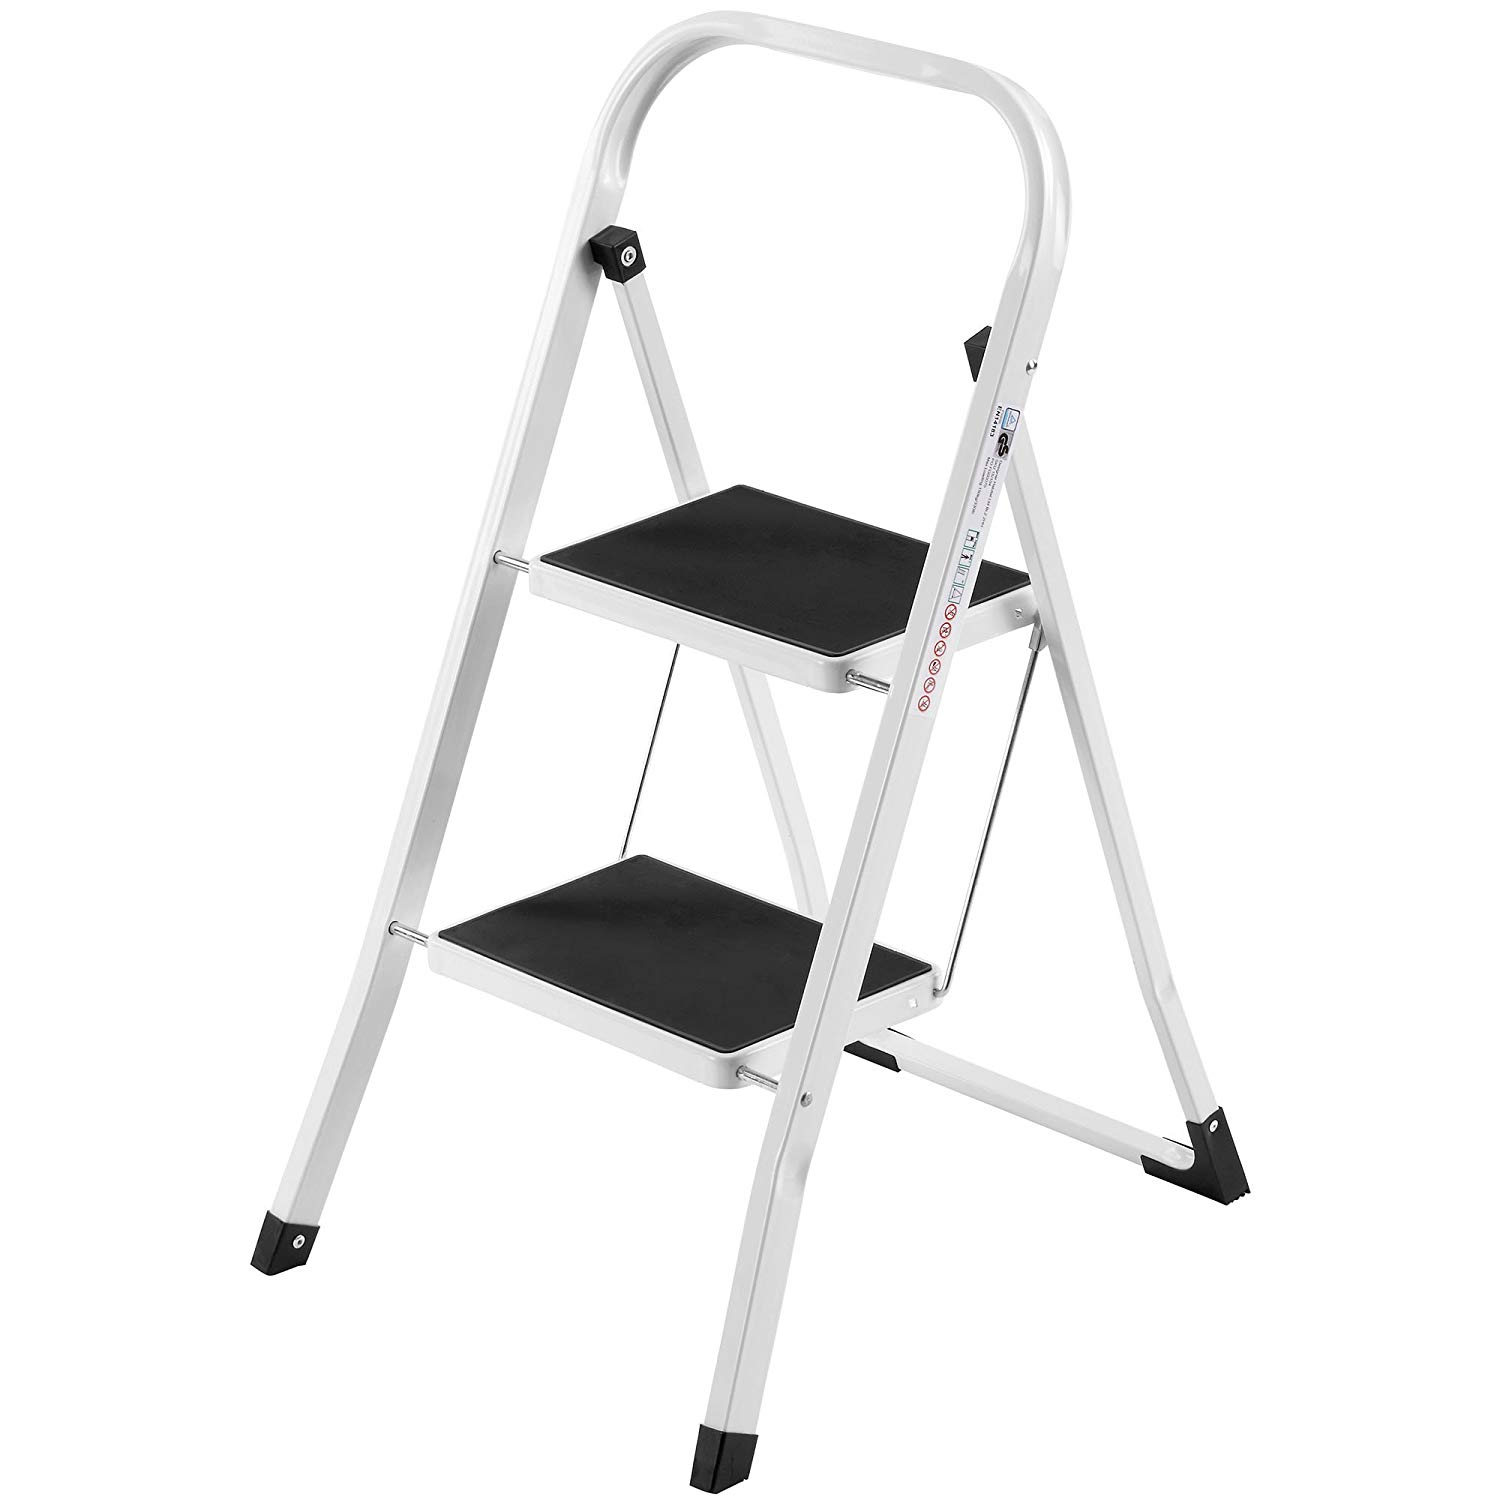 VonHaus Steel 2 Step Ladder Folding Portable Stool with 330lbs Capacity - Lightweight and Sturdy, White, 2 Step